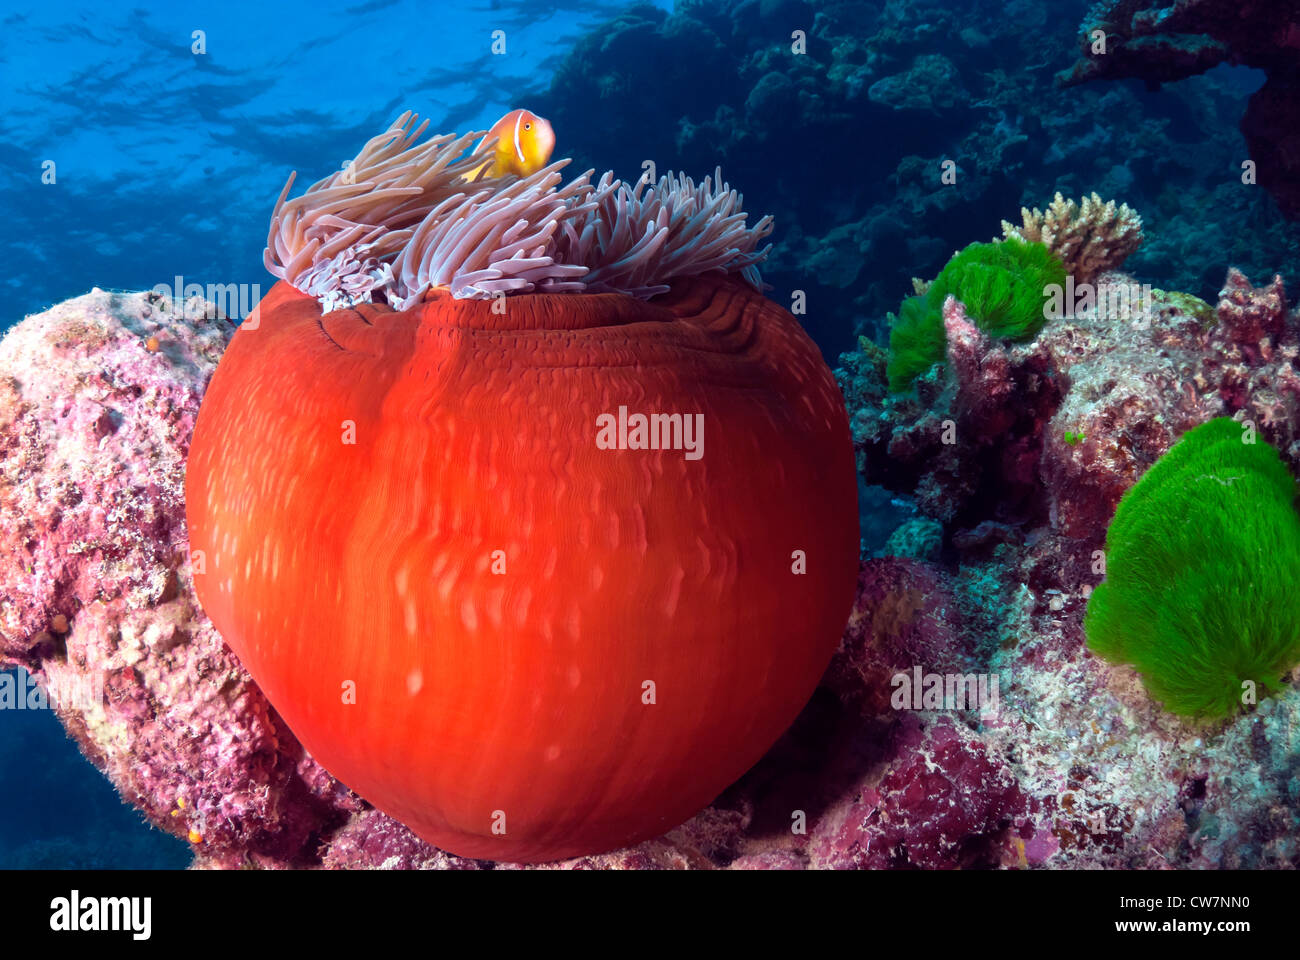 Pink Anemone Fish in a closed anemone, Great Barrier Reef, Coral Sea, South Pacific Ocean, Australia Stock Photo